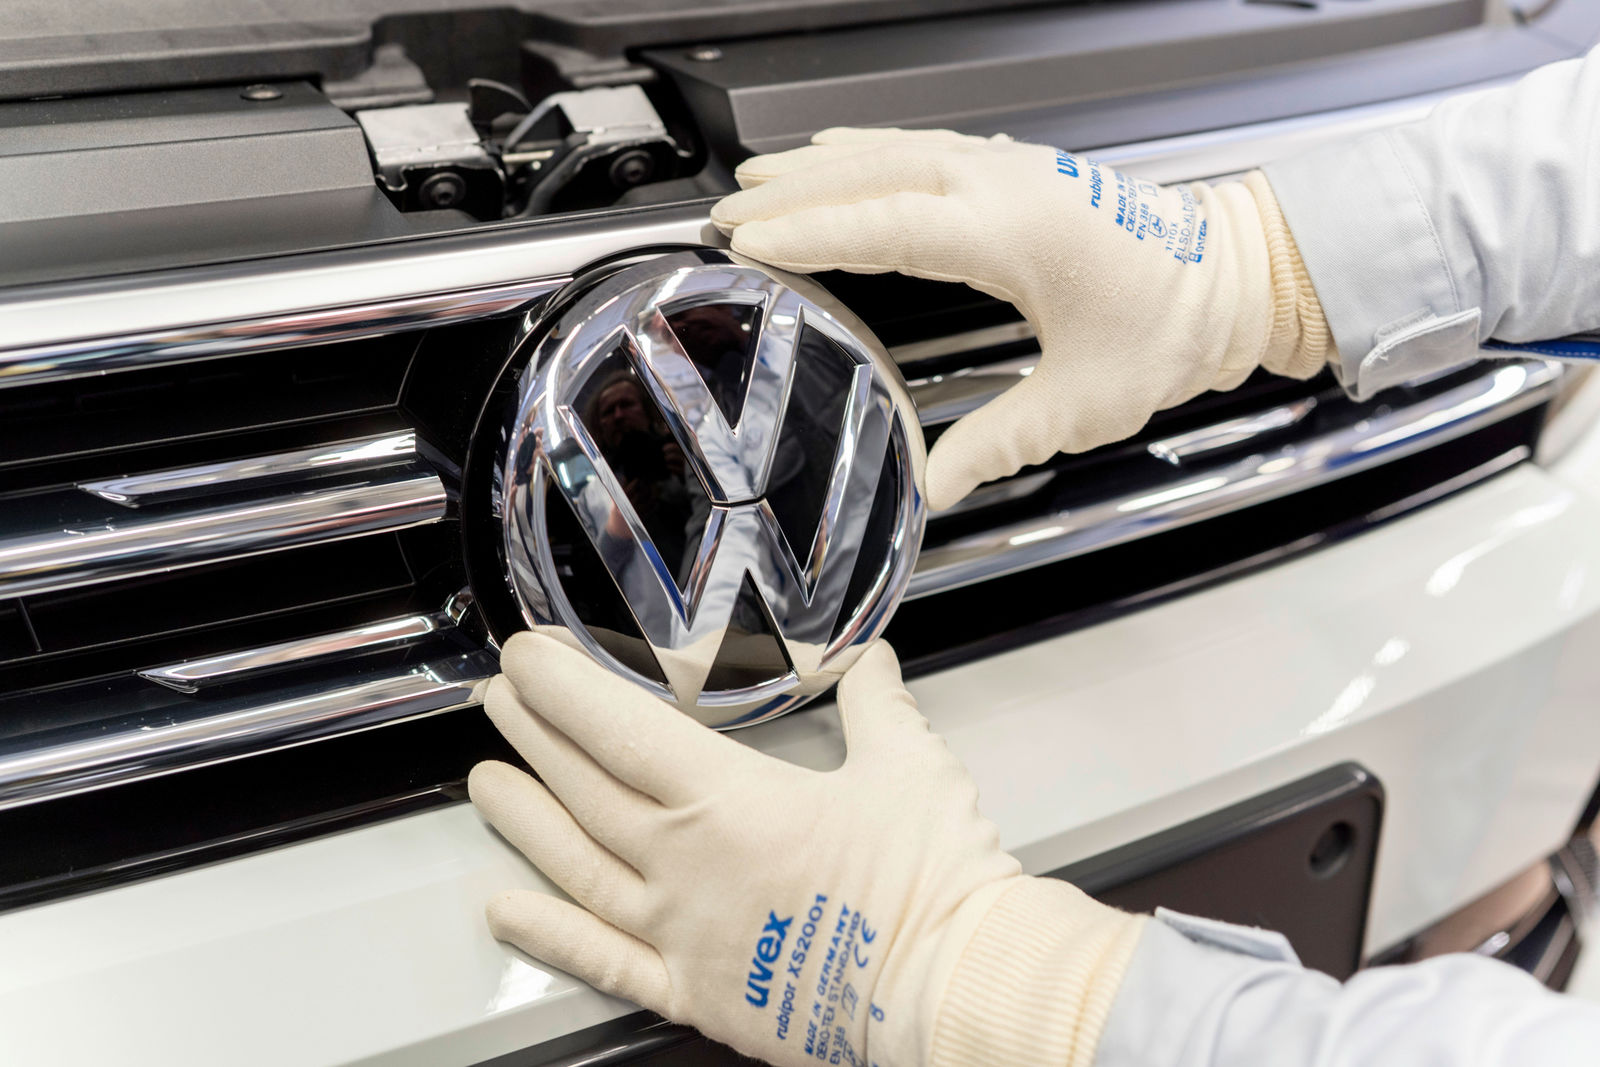 Assembly Wolfsburg plant: Installing the VW-emblem to the radiator grill